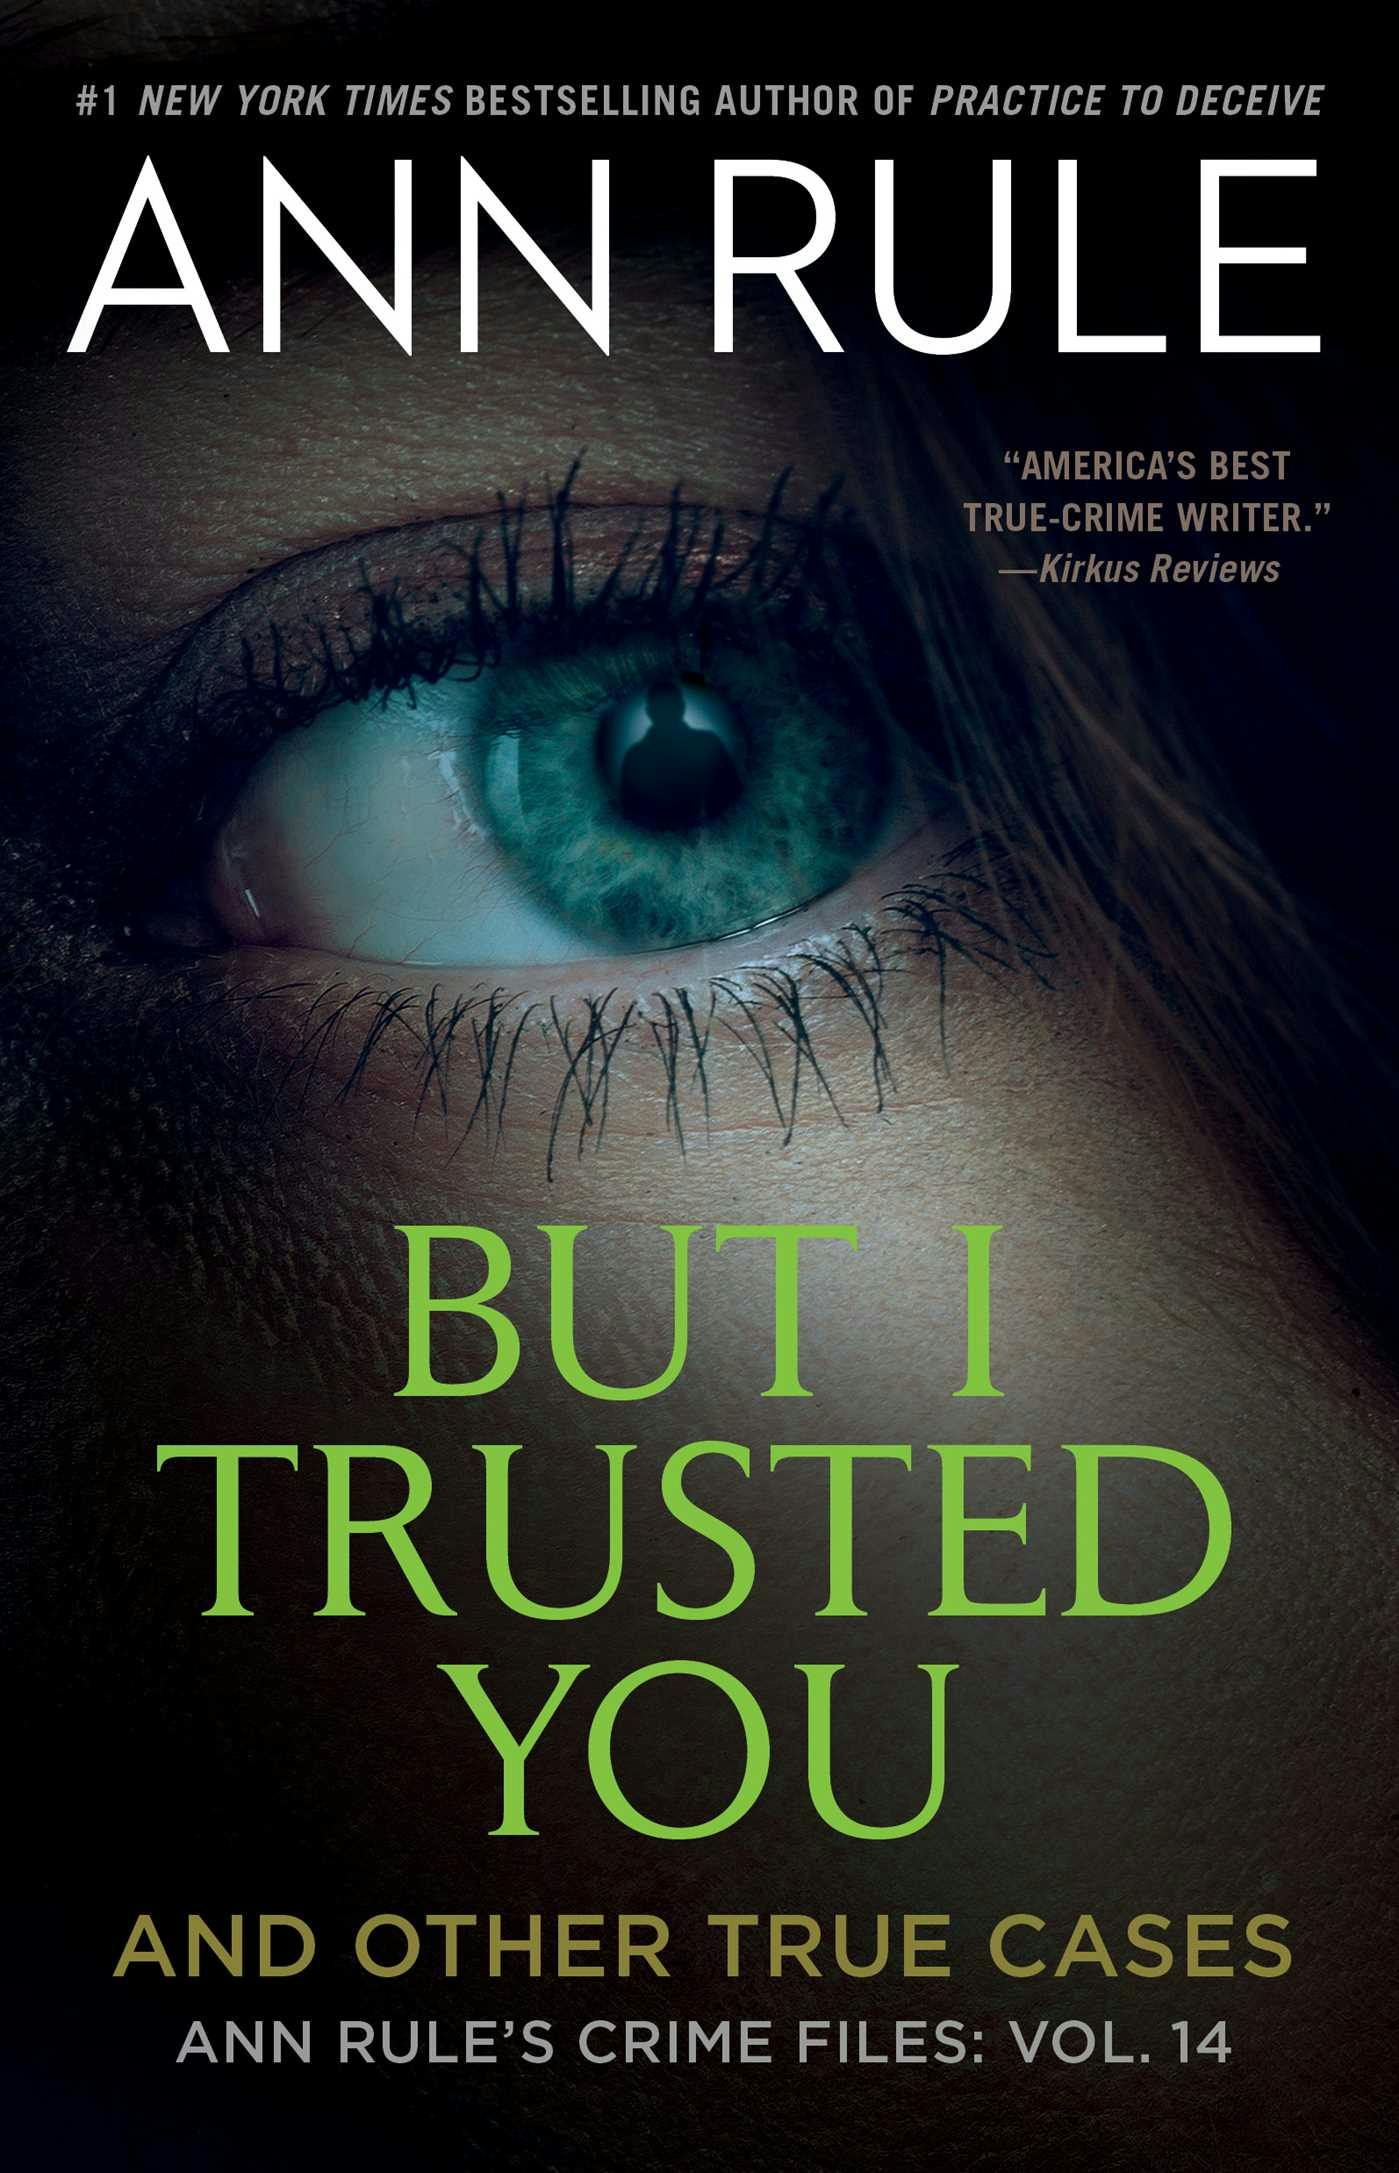 But I Trusted You: Ann Rule's Crime Files #14 - Ann Rule